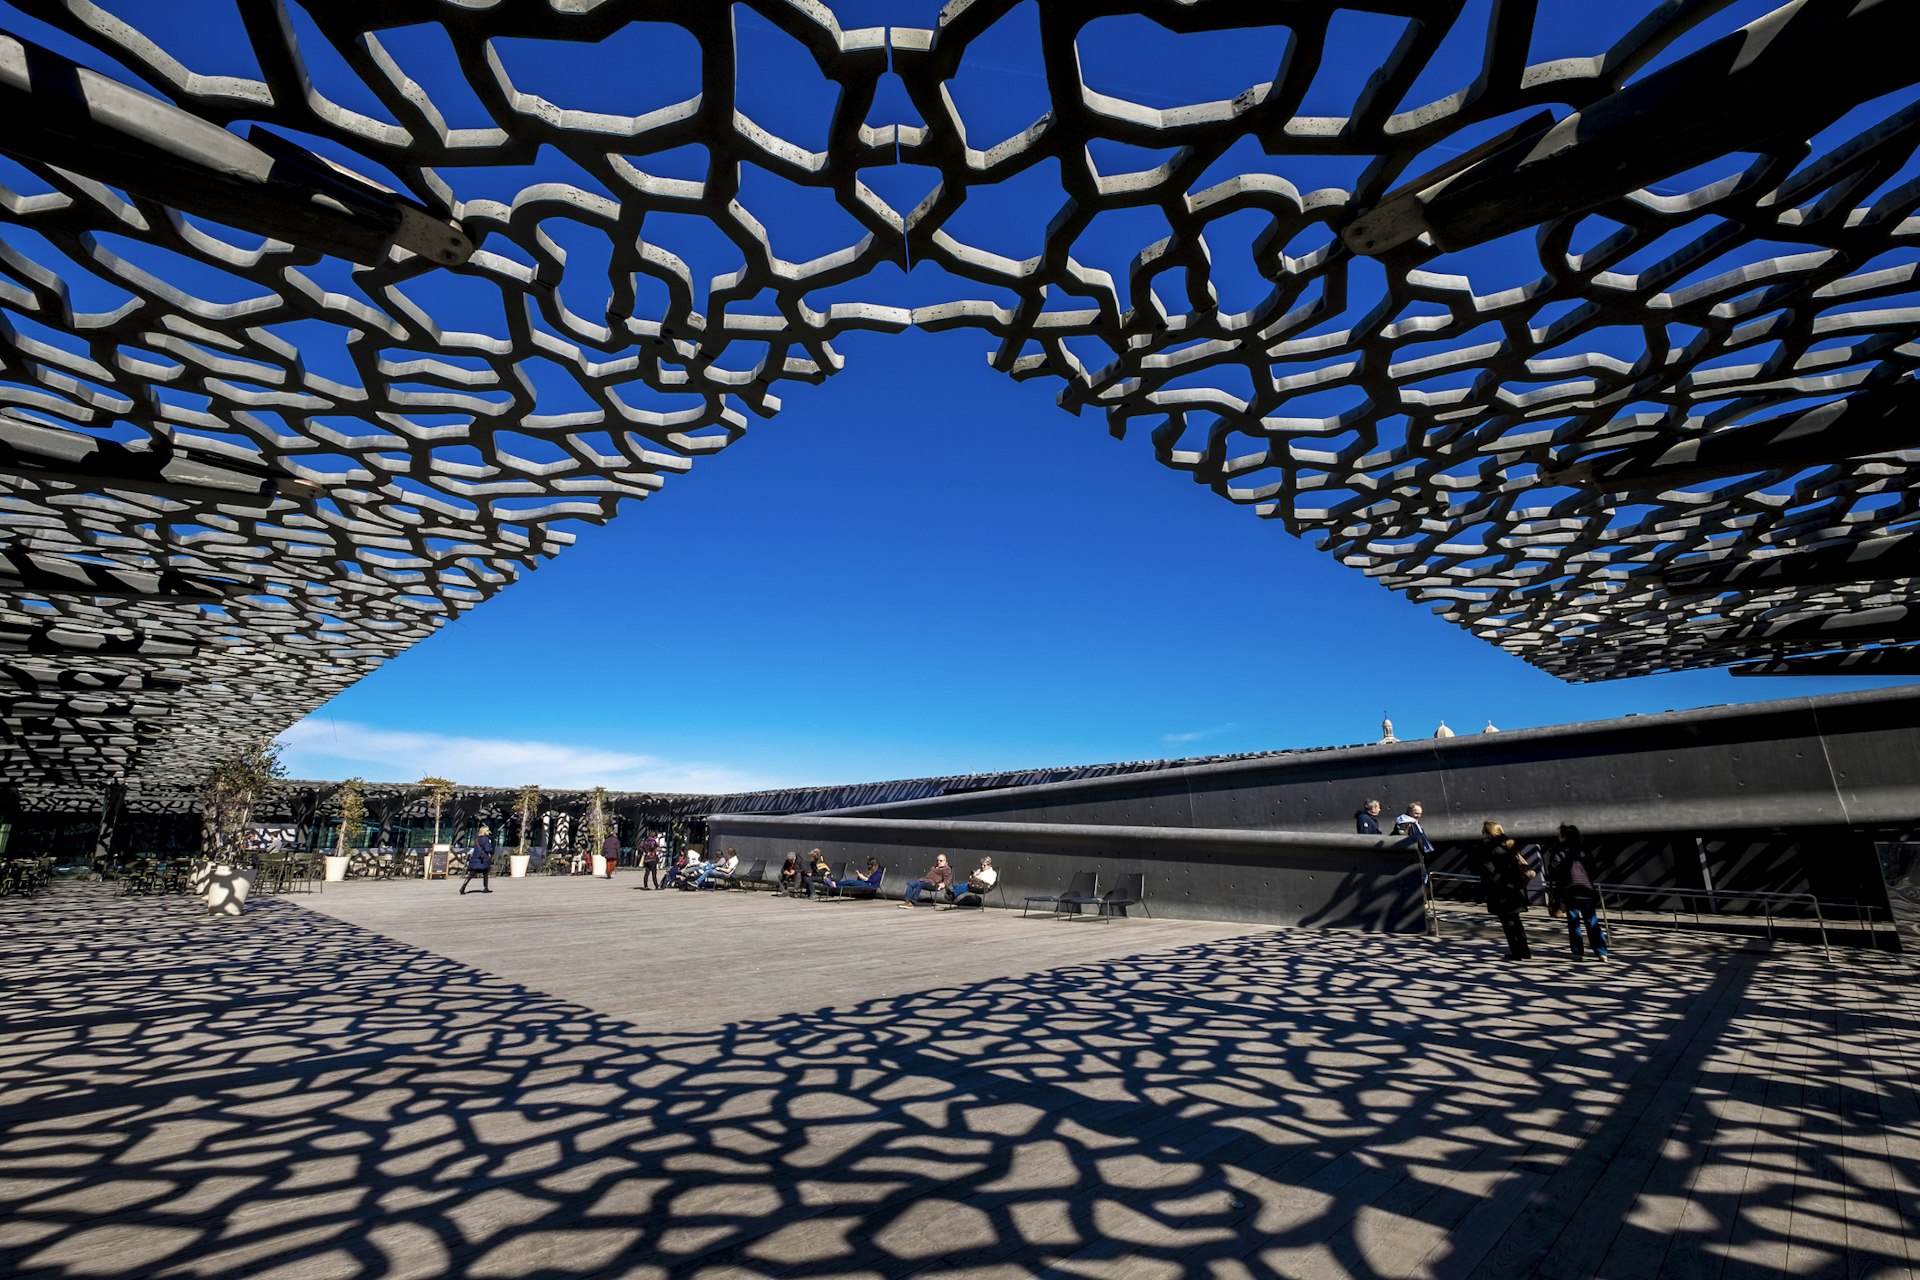 A lattice of metal forms part of the roof of a museum building, creating a network of shadows on the ground in an open square full of visitors